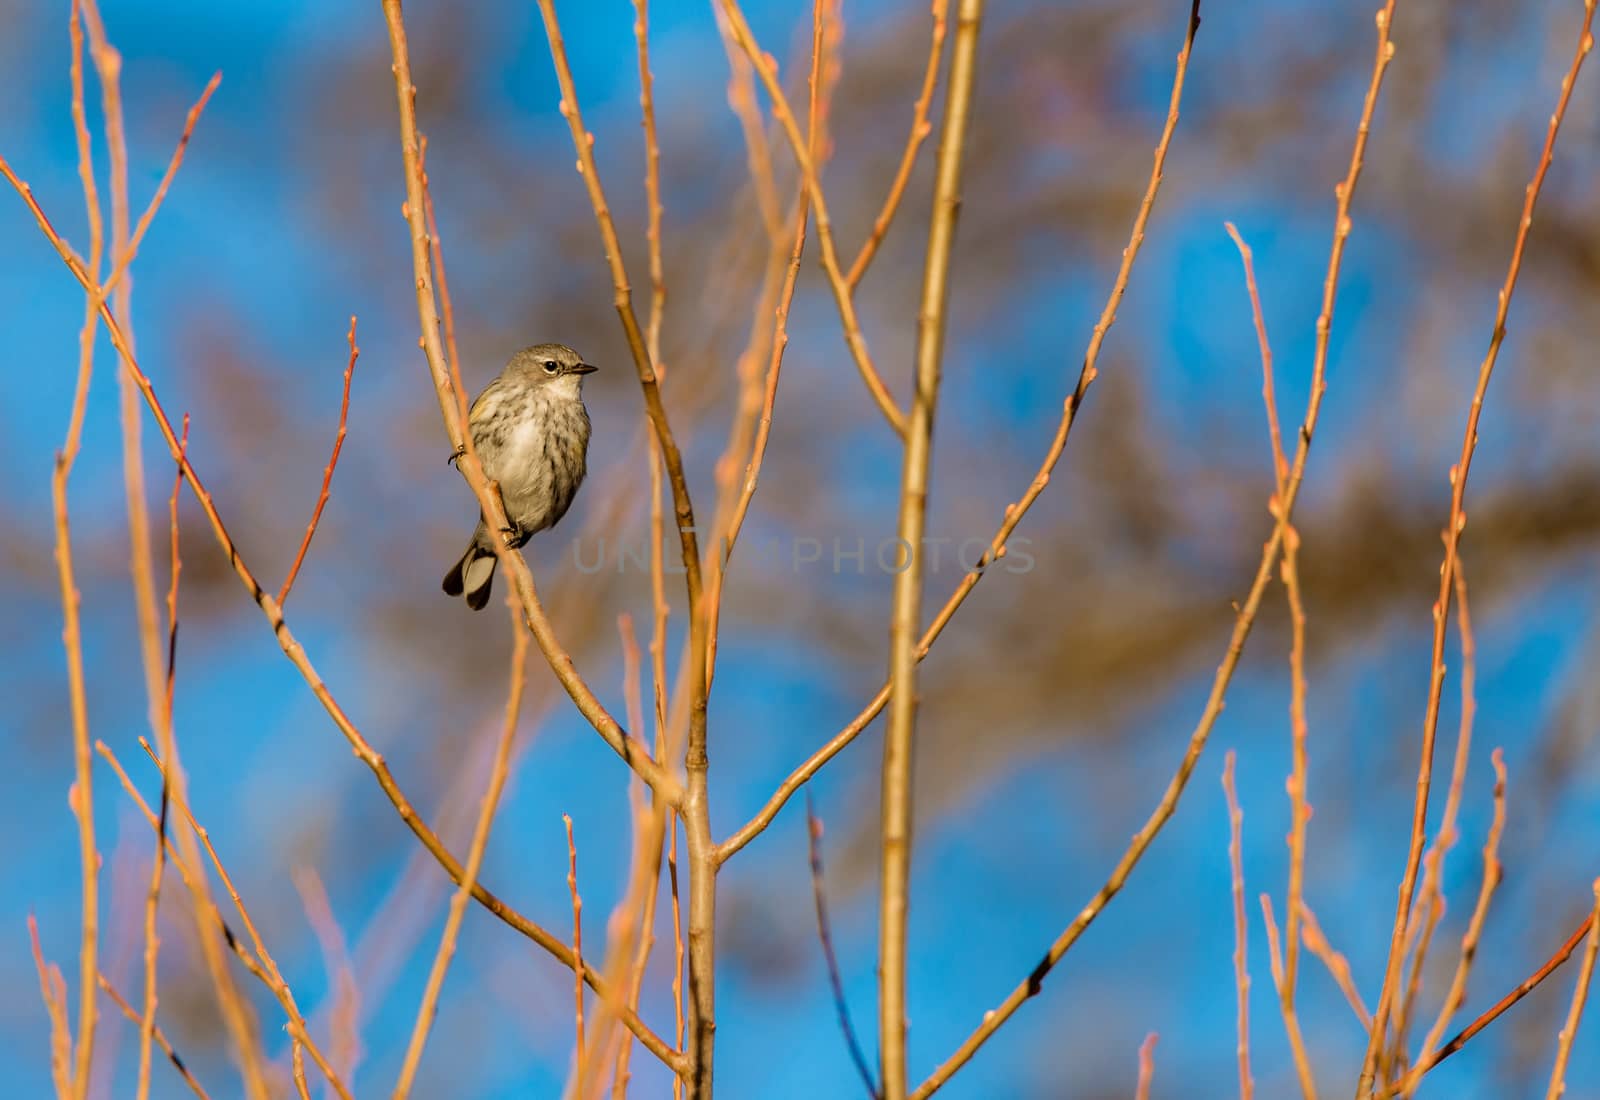 North American yellow-rumped warbler in winter by Pendleton